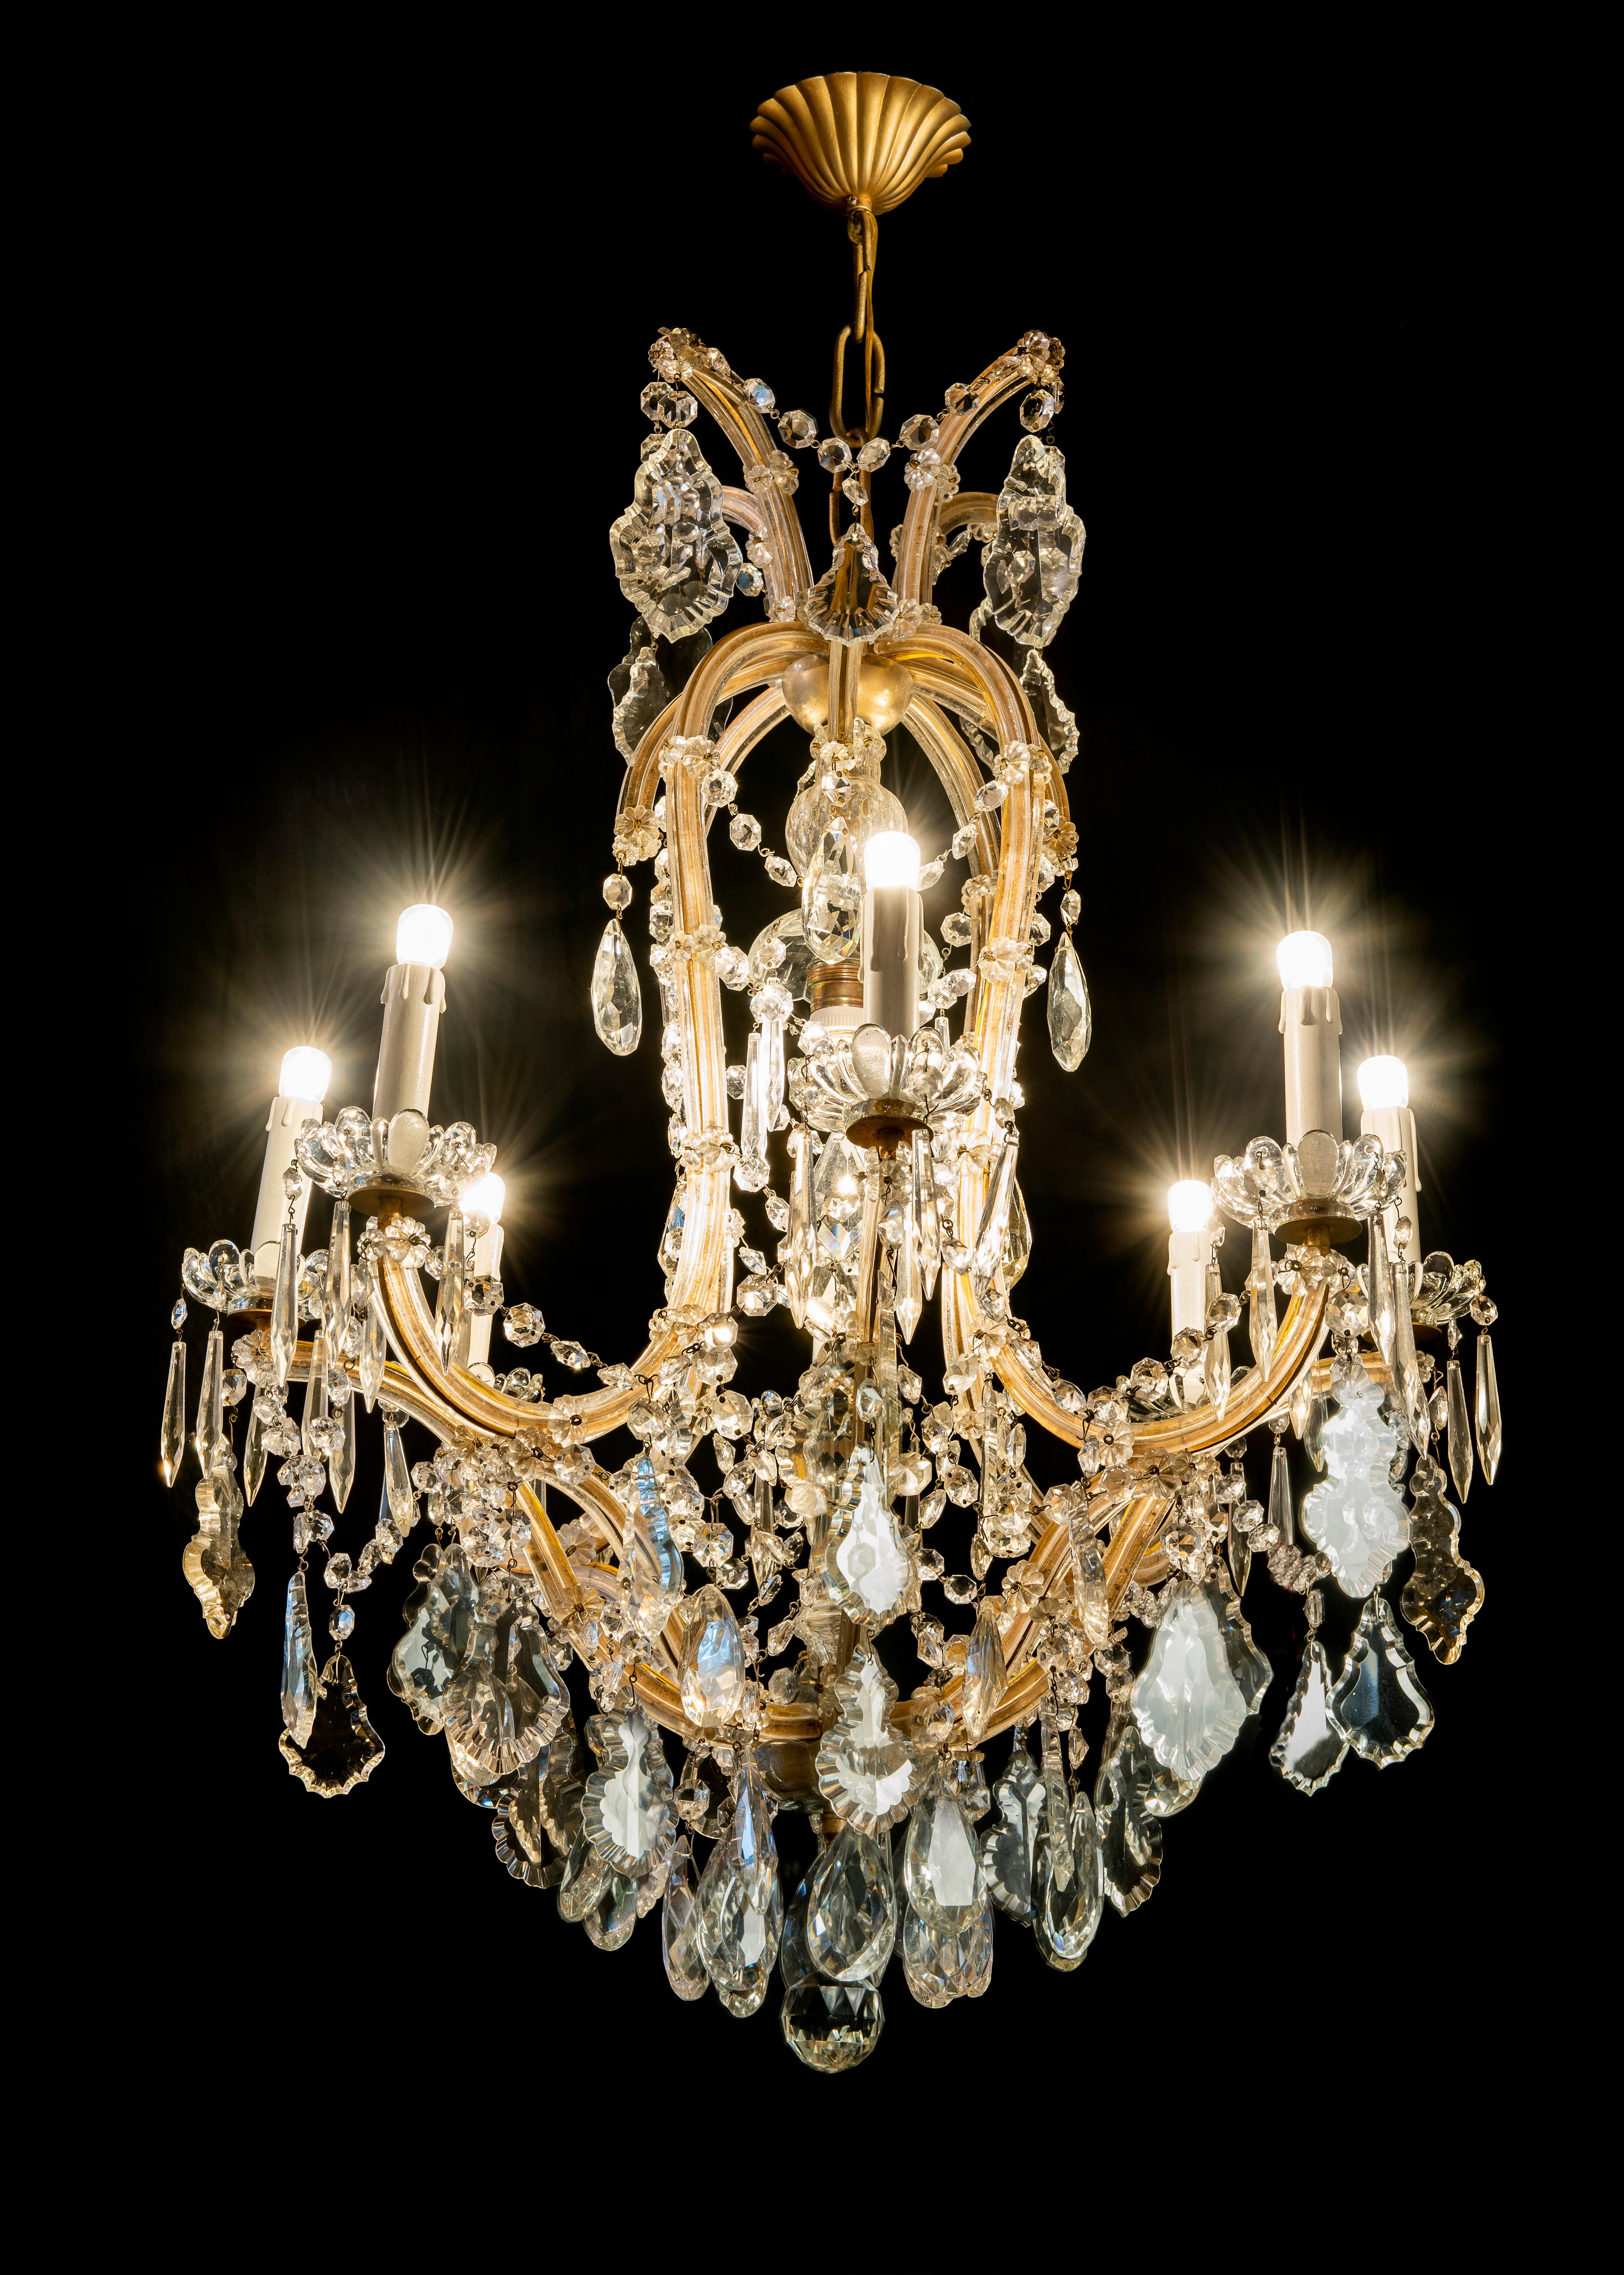 From Italy a Maria Teresa crystal chandelier fully arranged with crystal chains and drops. A nine-light chandelier with eight curved arms and one extra bulb in the upper centre of the structure. Perfect condition. New wiring for Italian